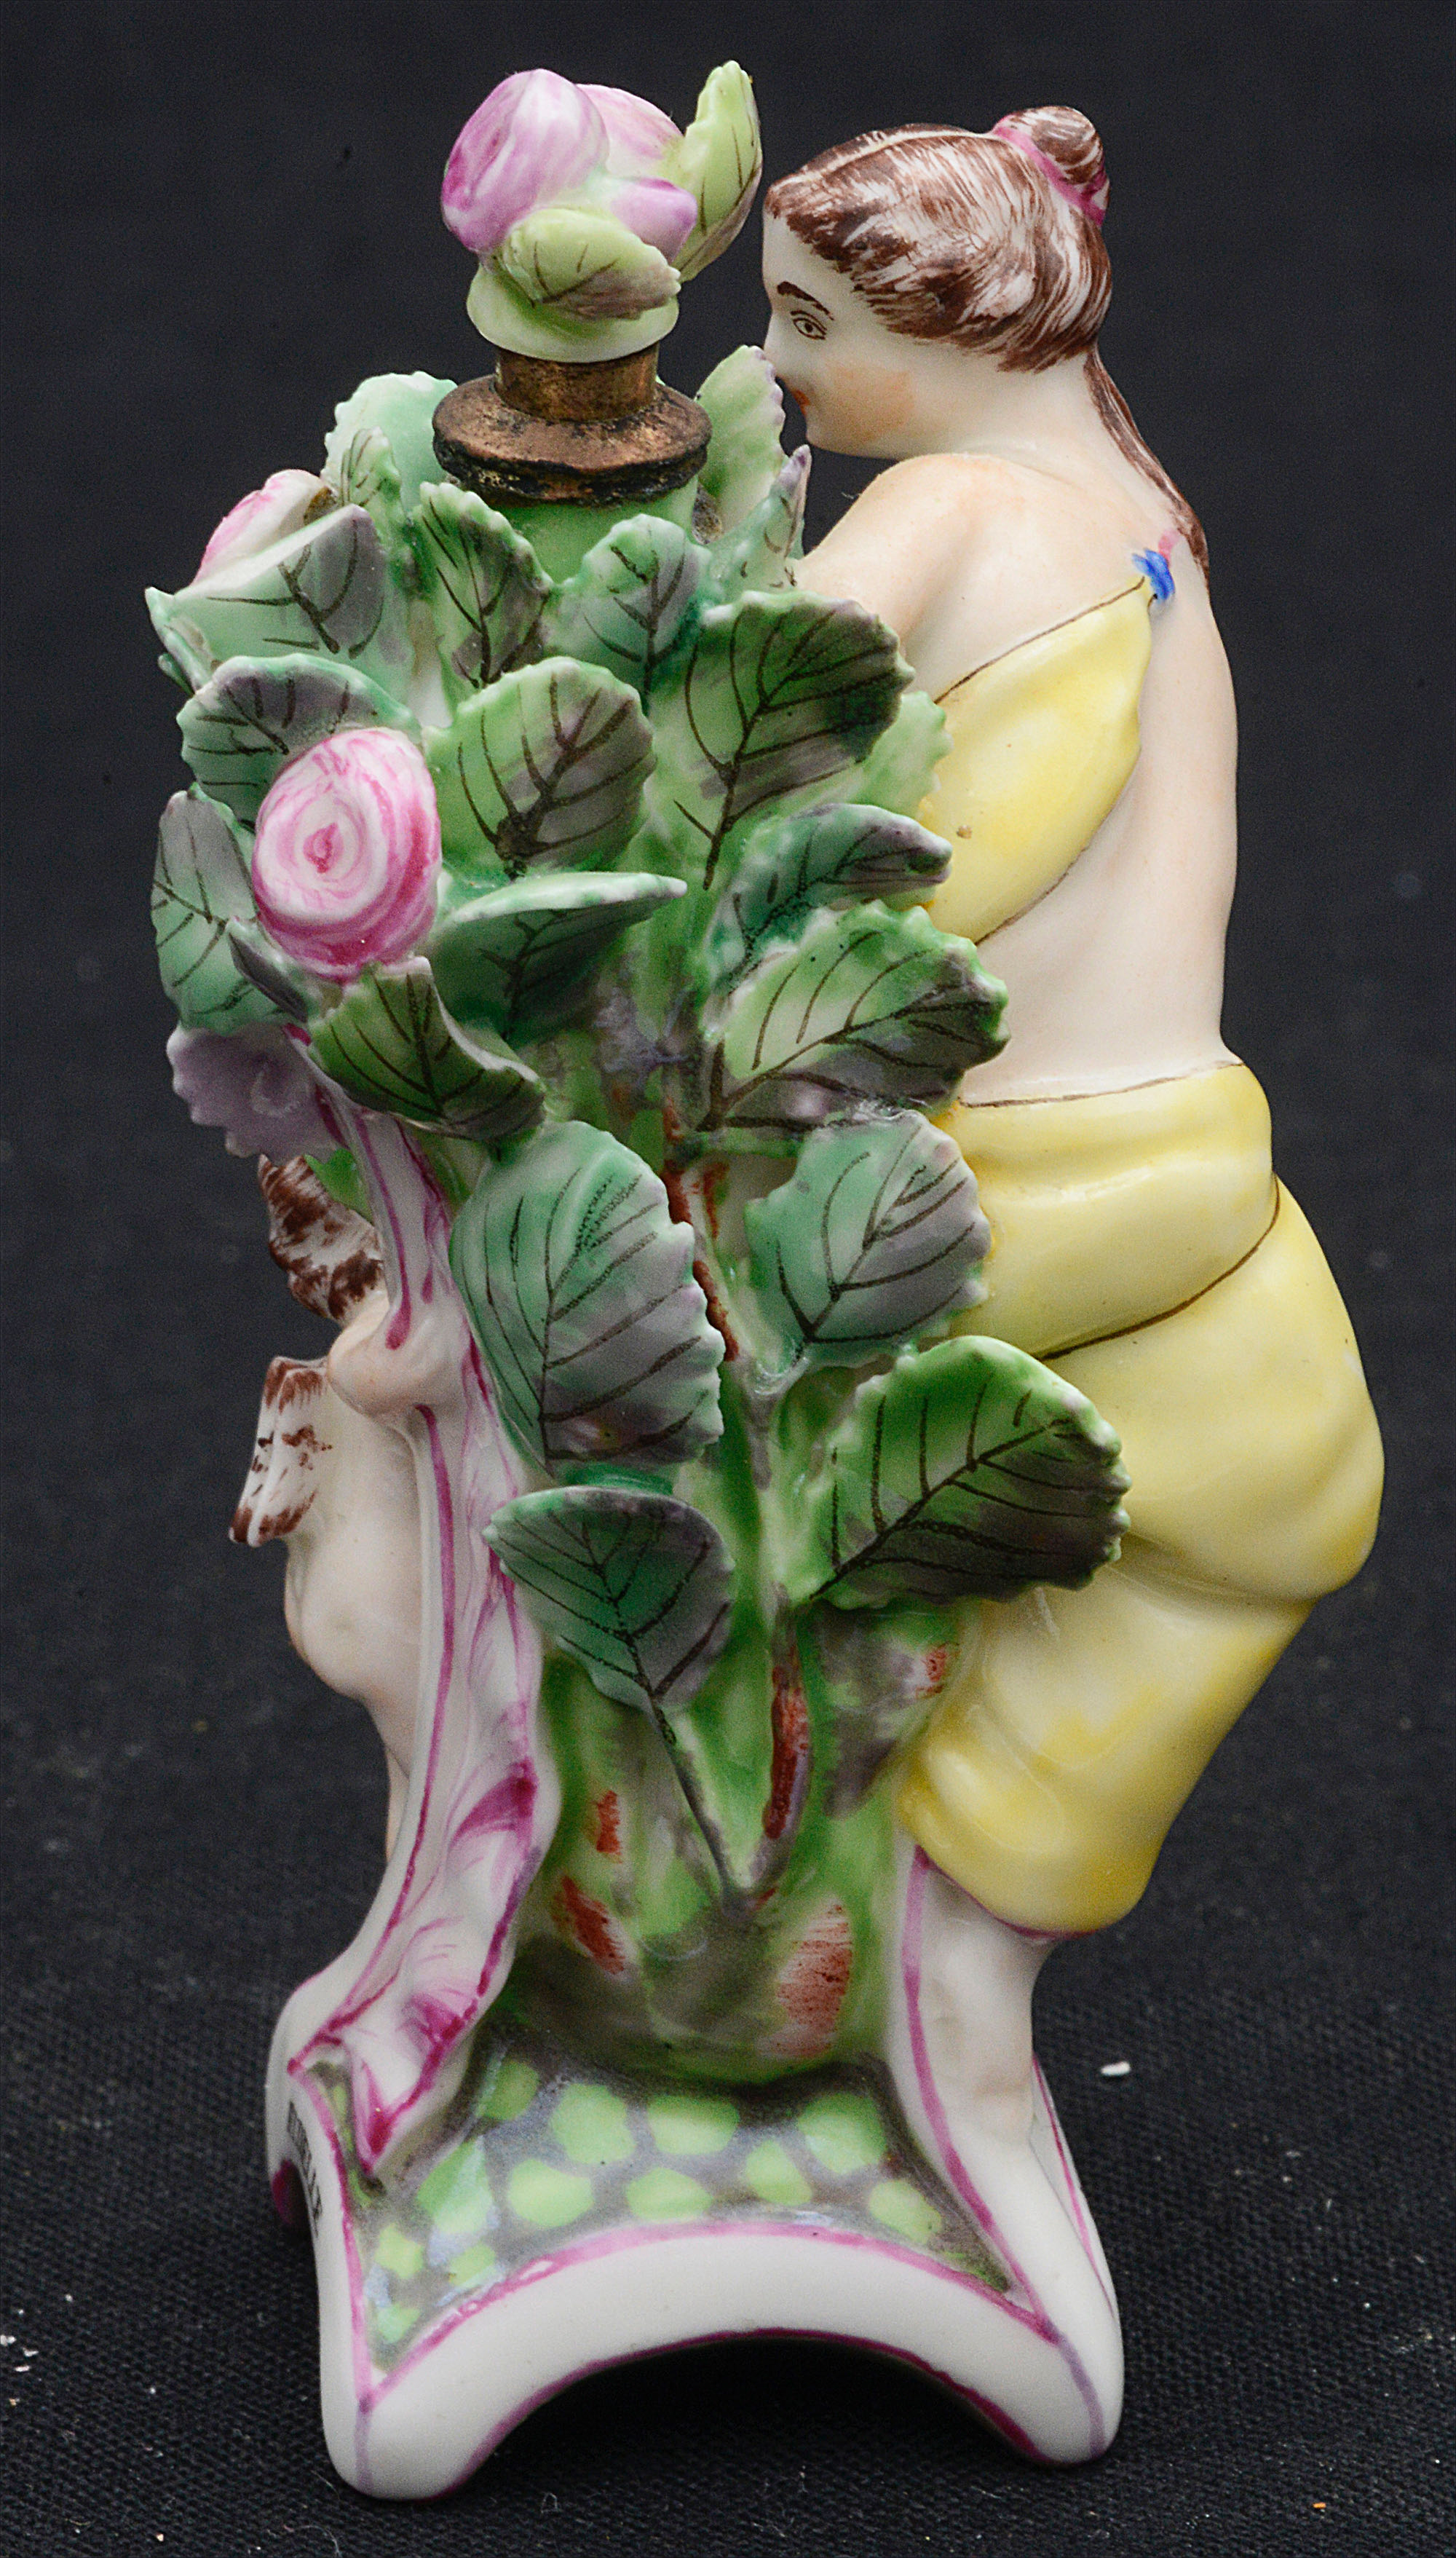 A St. James's (Charles Gouyn) porcelain scent bottle and stopper circa 1749-60 - Image 2 of 4